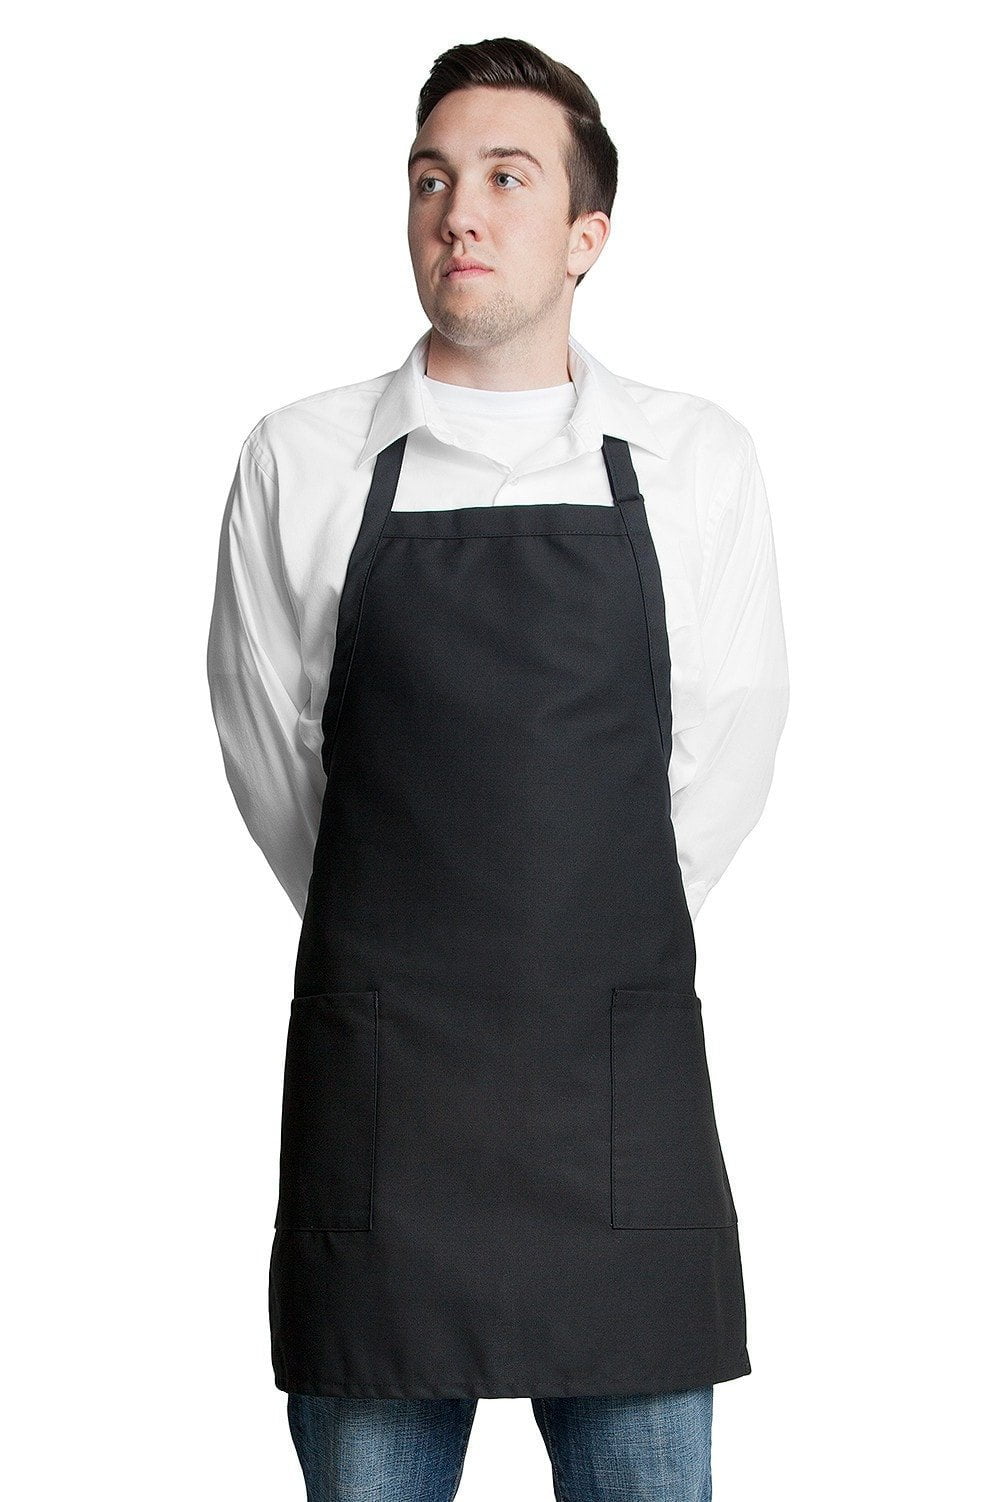 Men's chef Apron in black color – FaceOff Clothing